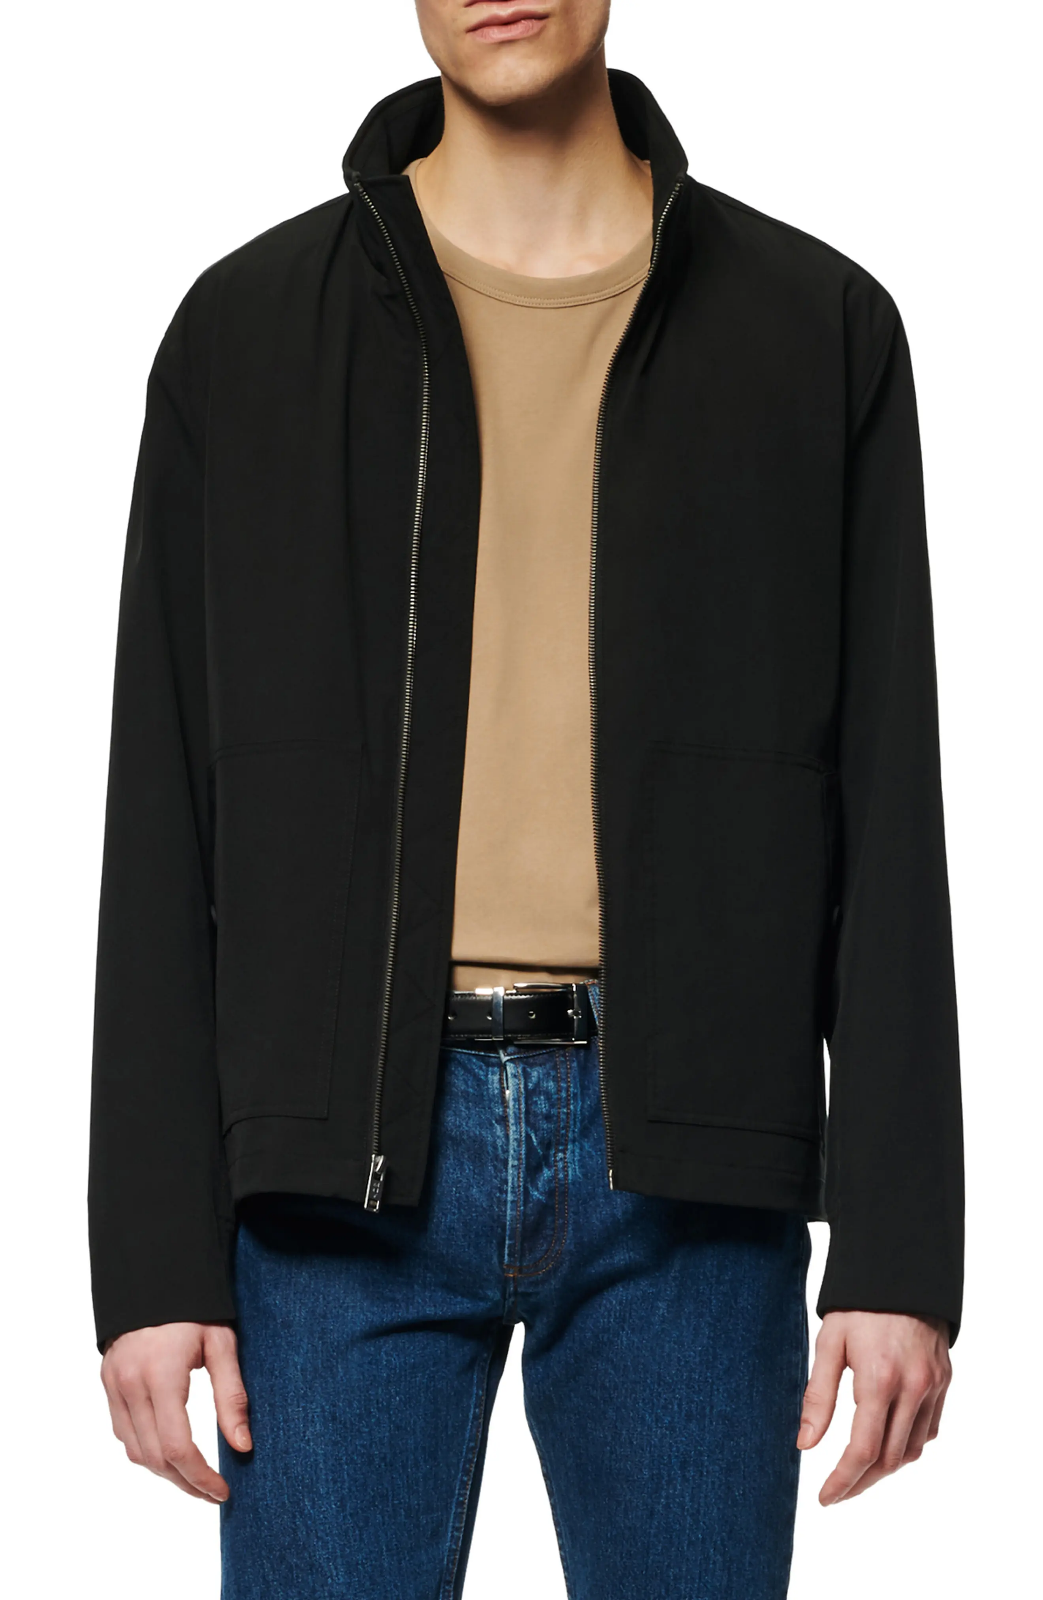 Marc New York Bowers Water Resistant Jacket